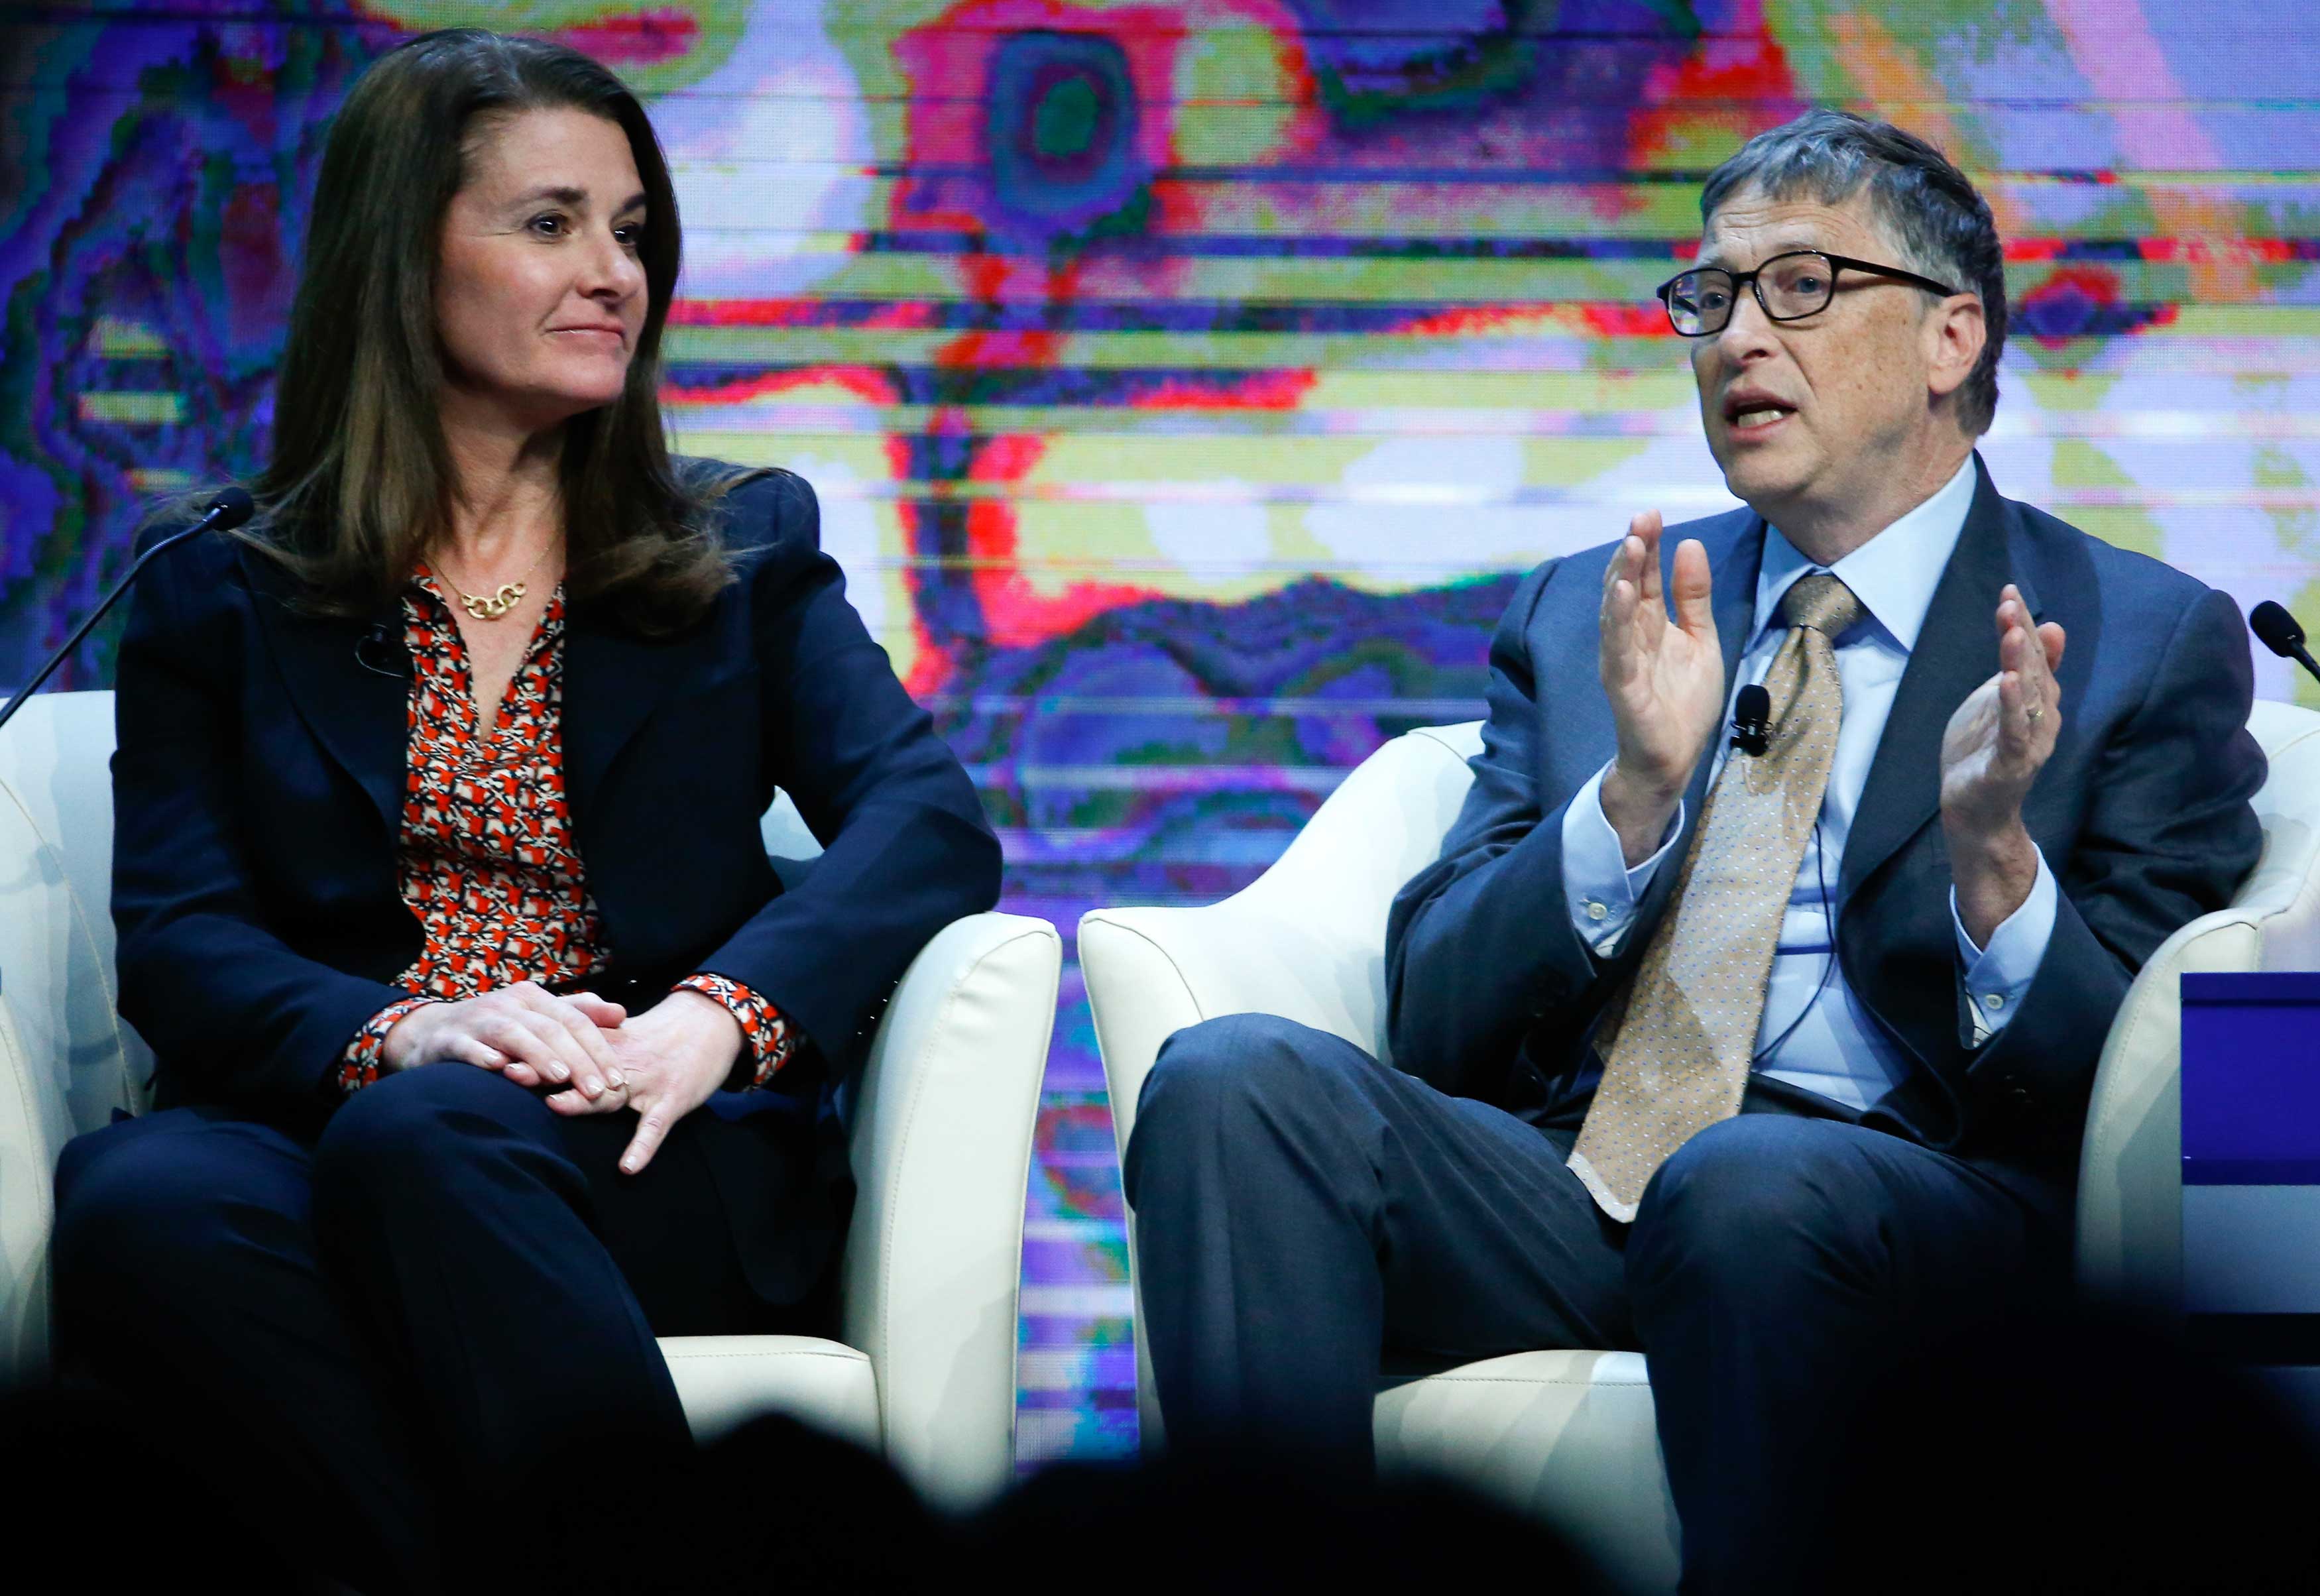 Bill Gates, Co-Chair of the Bill &amp; Melinda Gates Foundation gestures next to his wife Melinda French Gates during the session 'Sustainable Development: A Vision for the Future' in the Swiss mountain resort of Davos